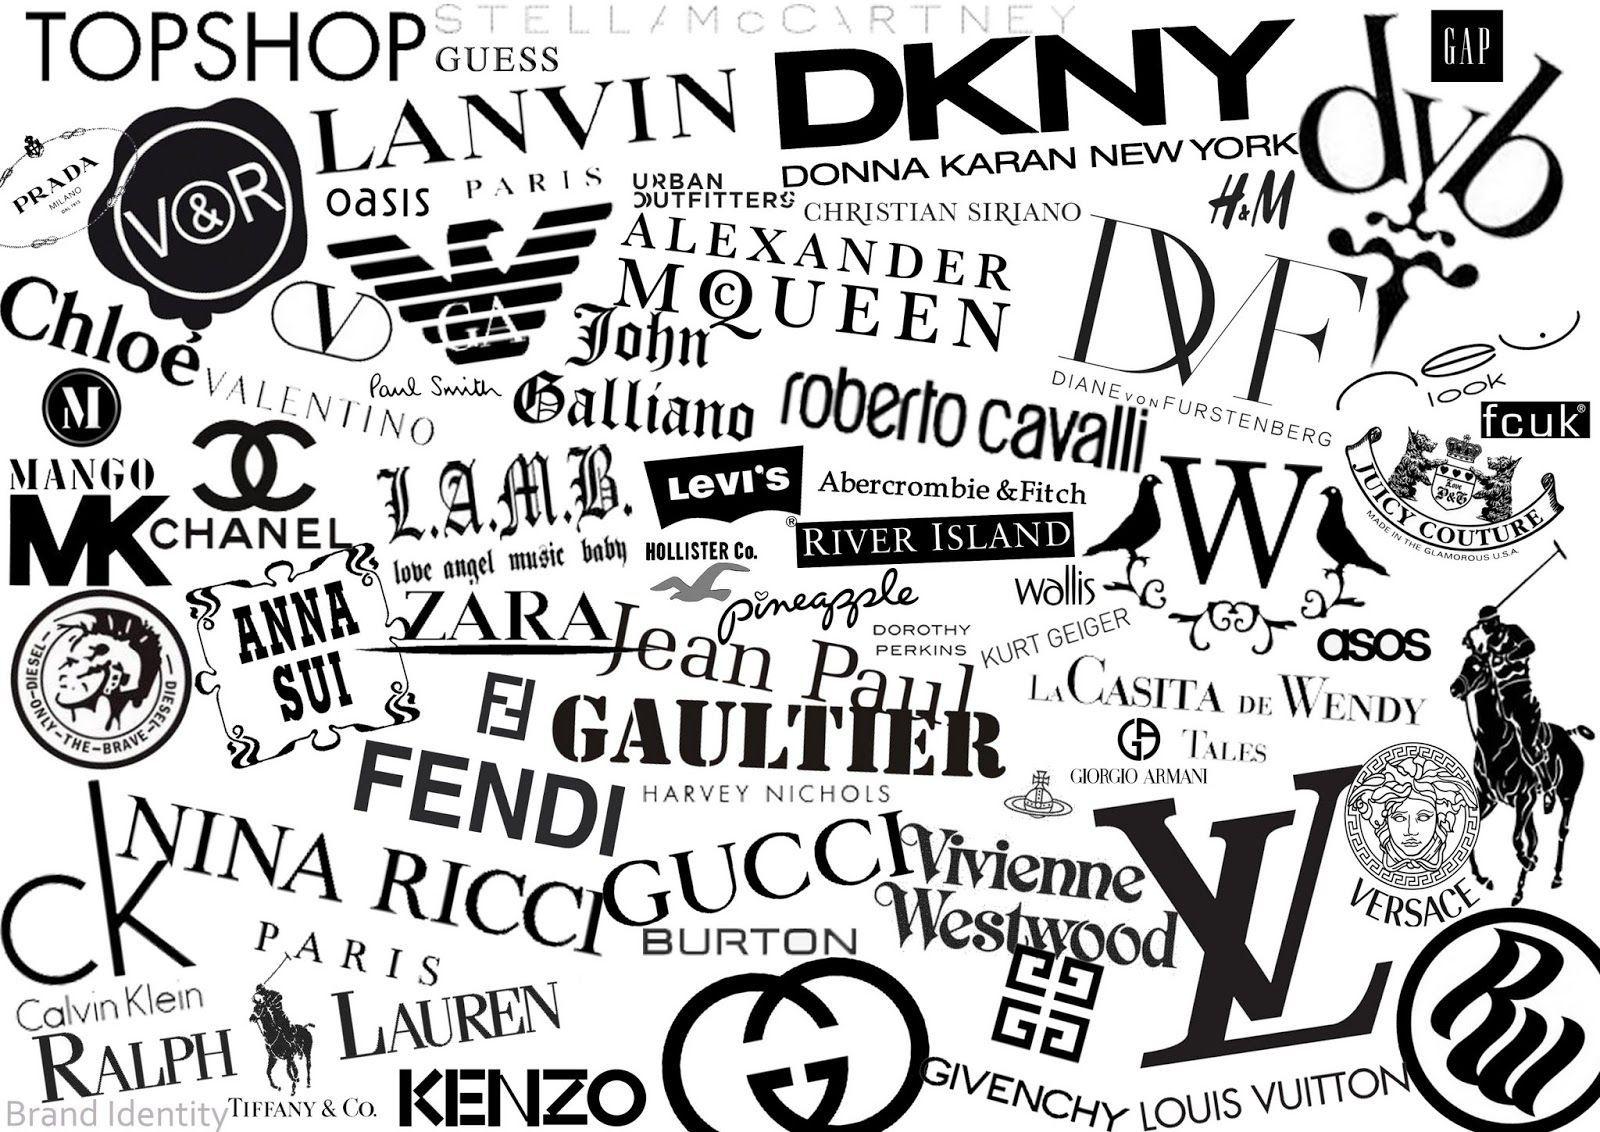 Famous Clothing Logo - Famous Brand of Clothes Logos. Wide range of fashion logos